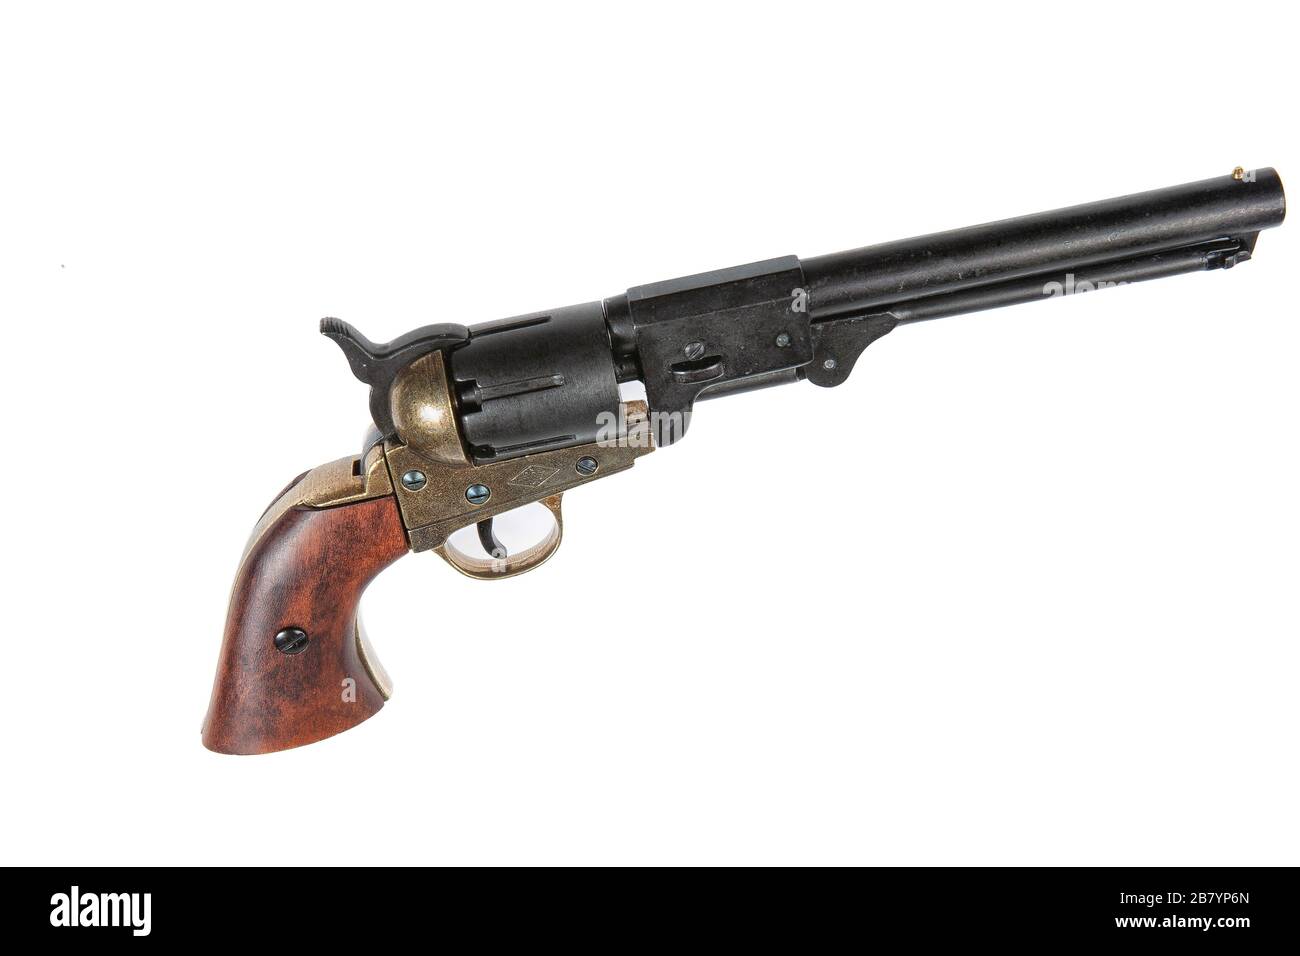 Old single action revolver on an isolated studio background Stock Photo